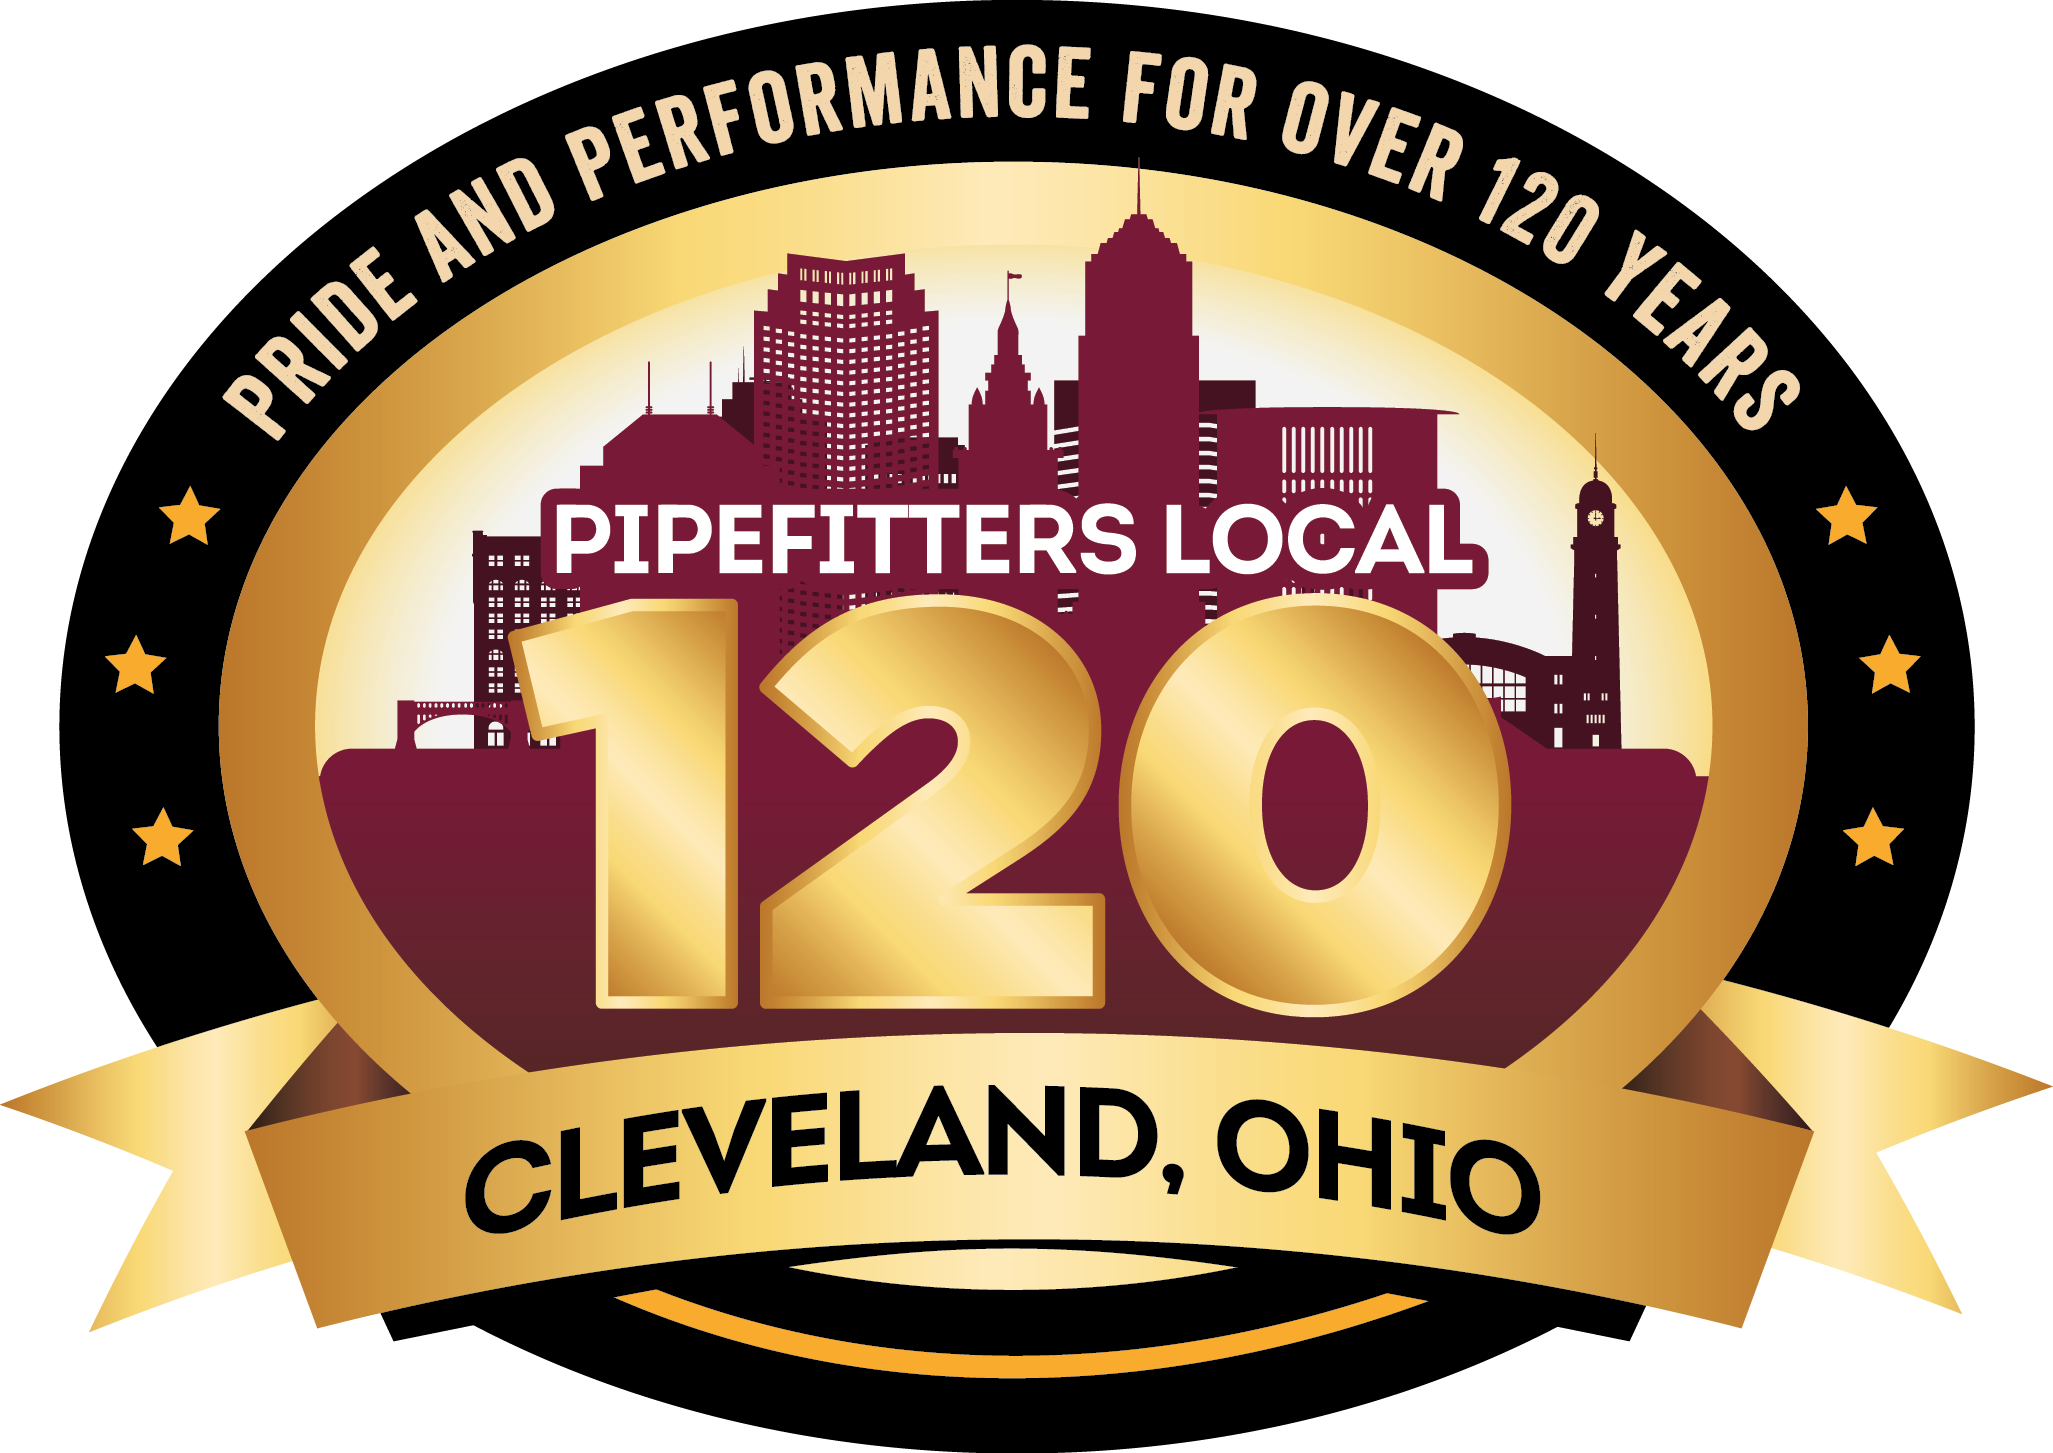 Pipefitters Local 120